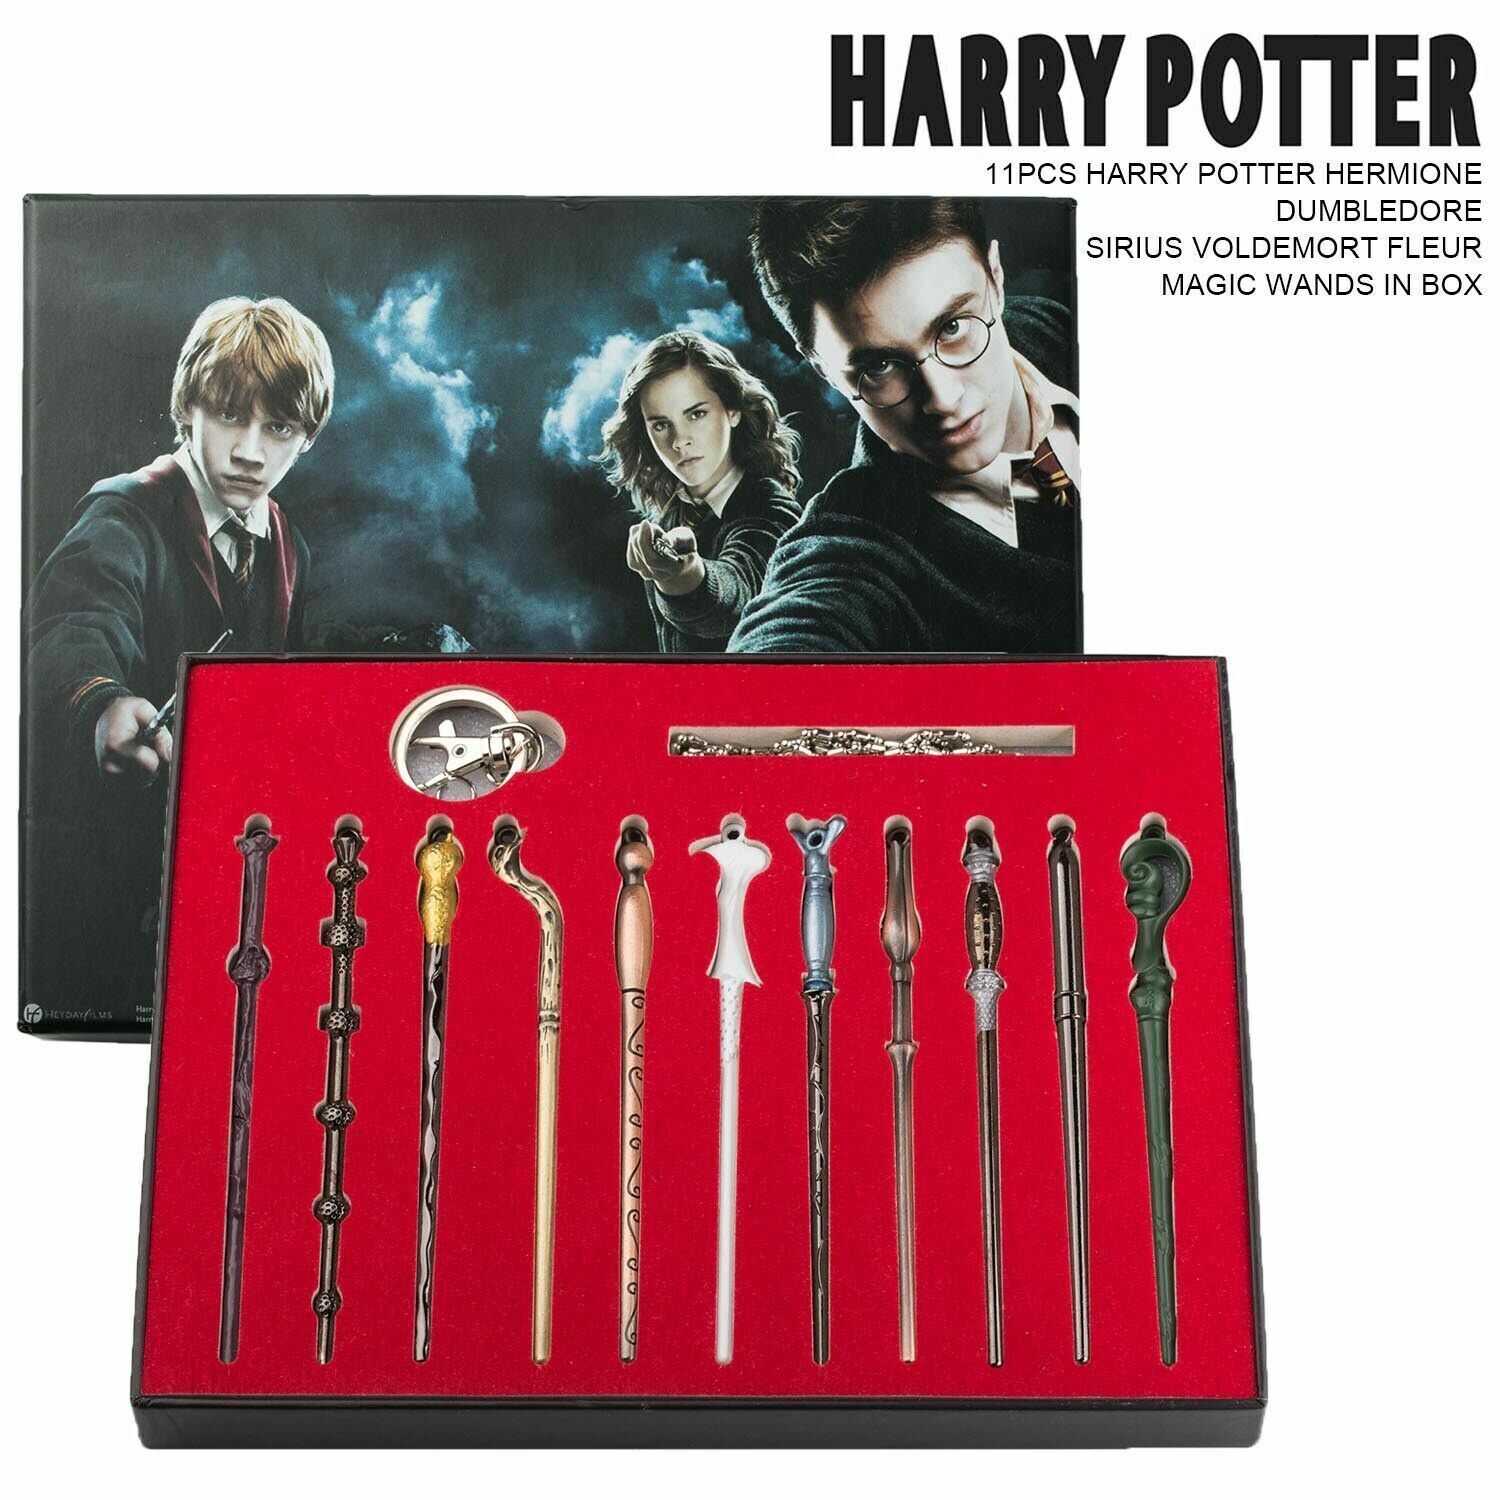 Brand New 11 PCS Harry Potter Hermione Dumbledore Snape Magic Wands With Box